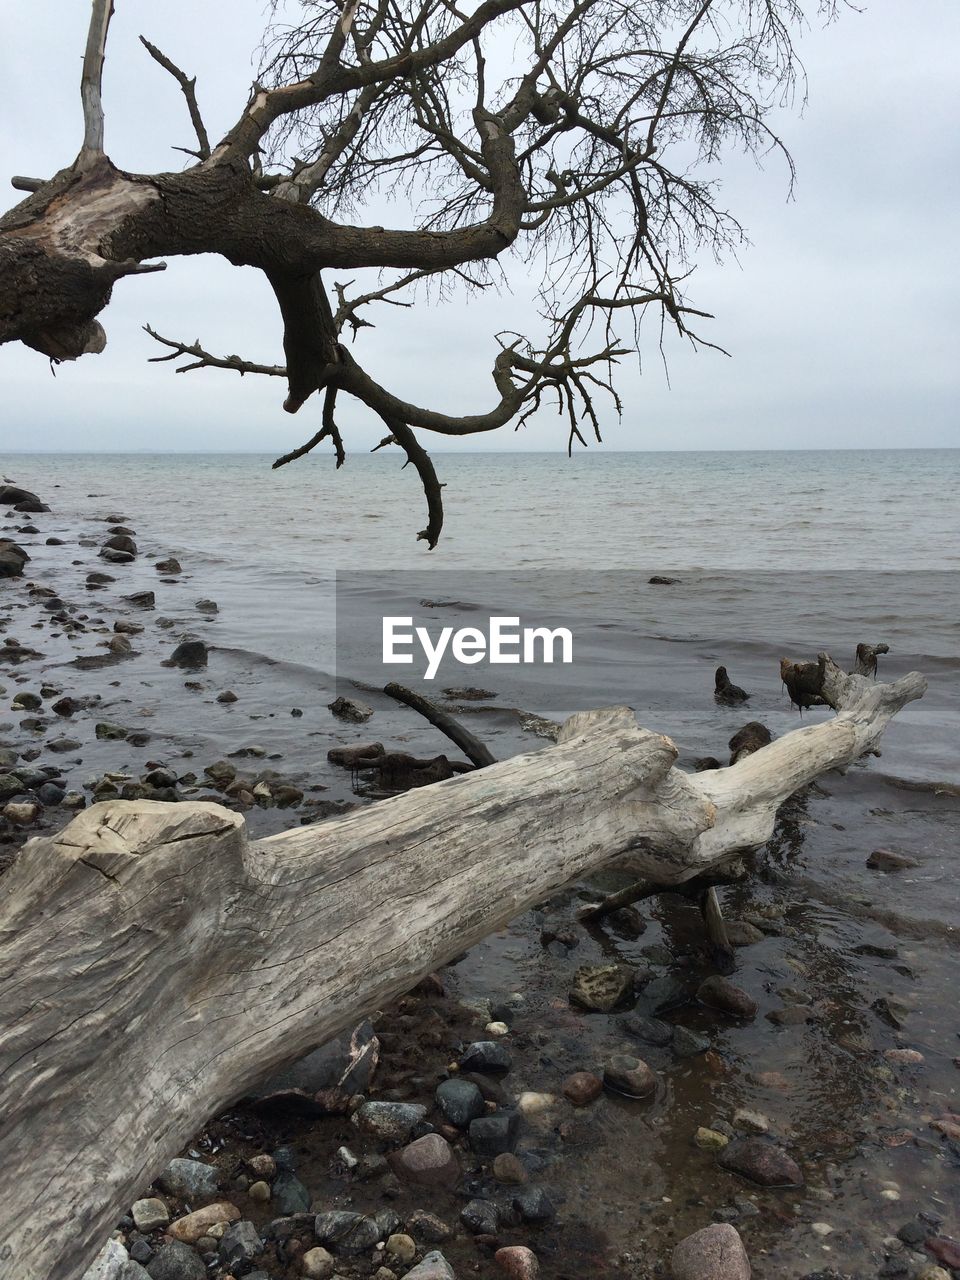 SCENIC VIEW OF DRIFTWOOD ON BEACH